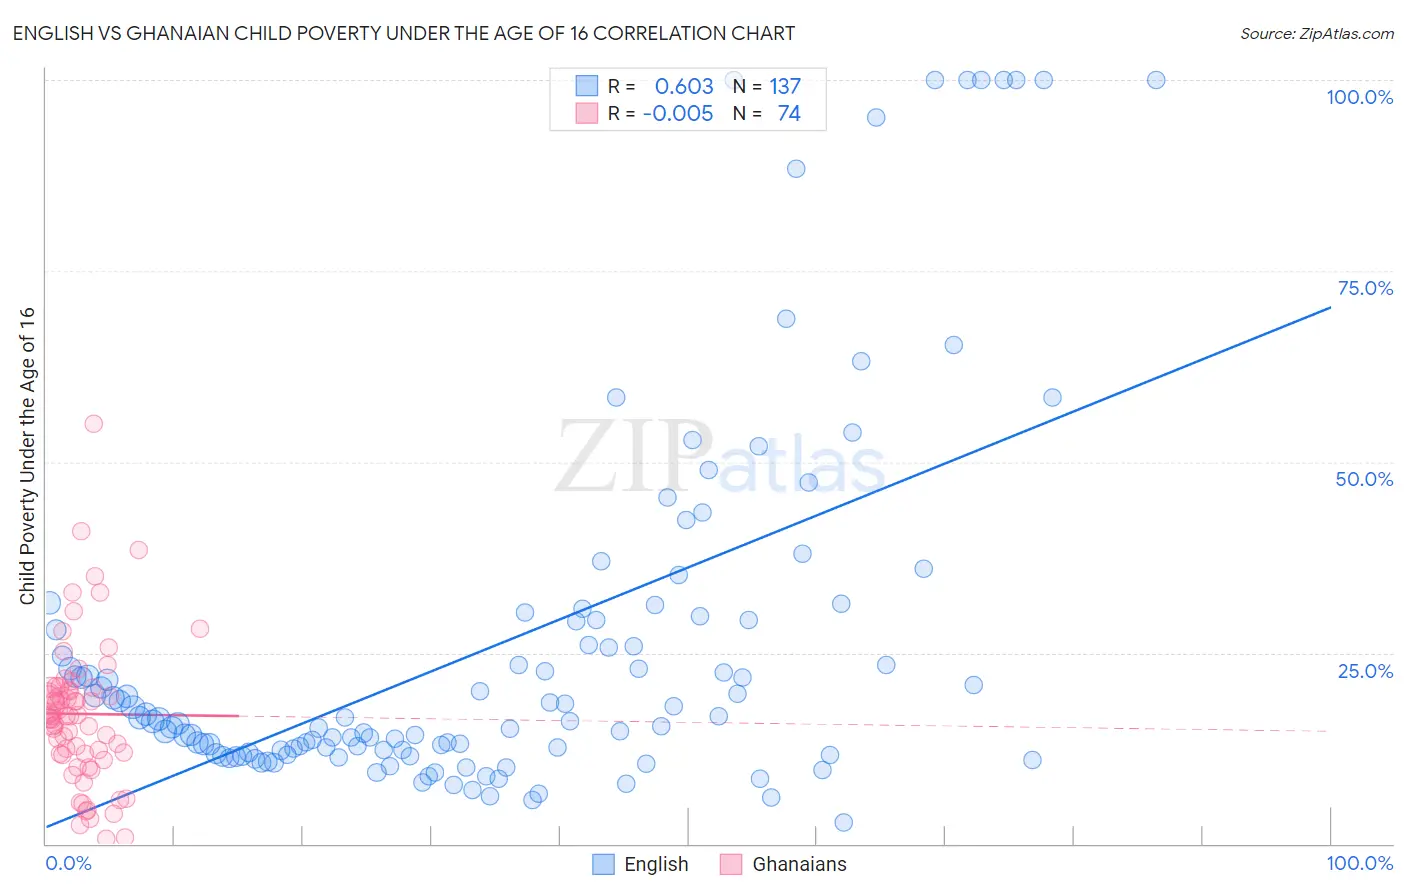 English vs Ghanaian Child Poverty Under the Age of 16